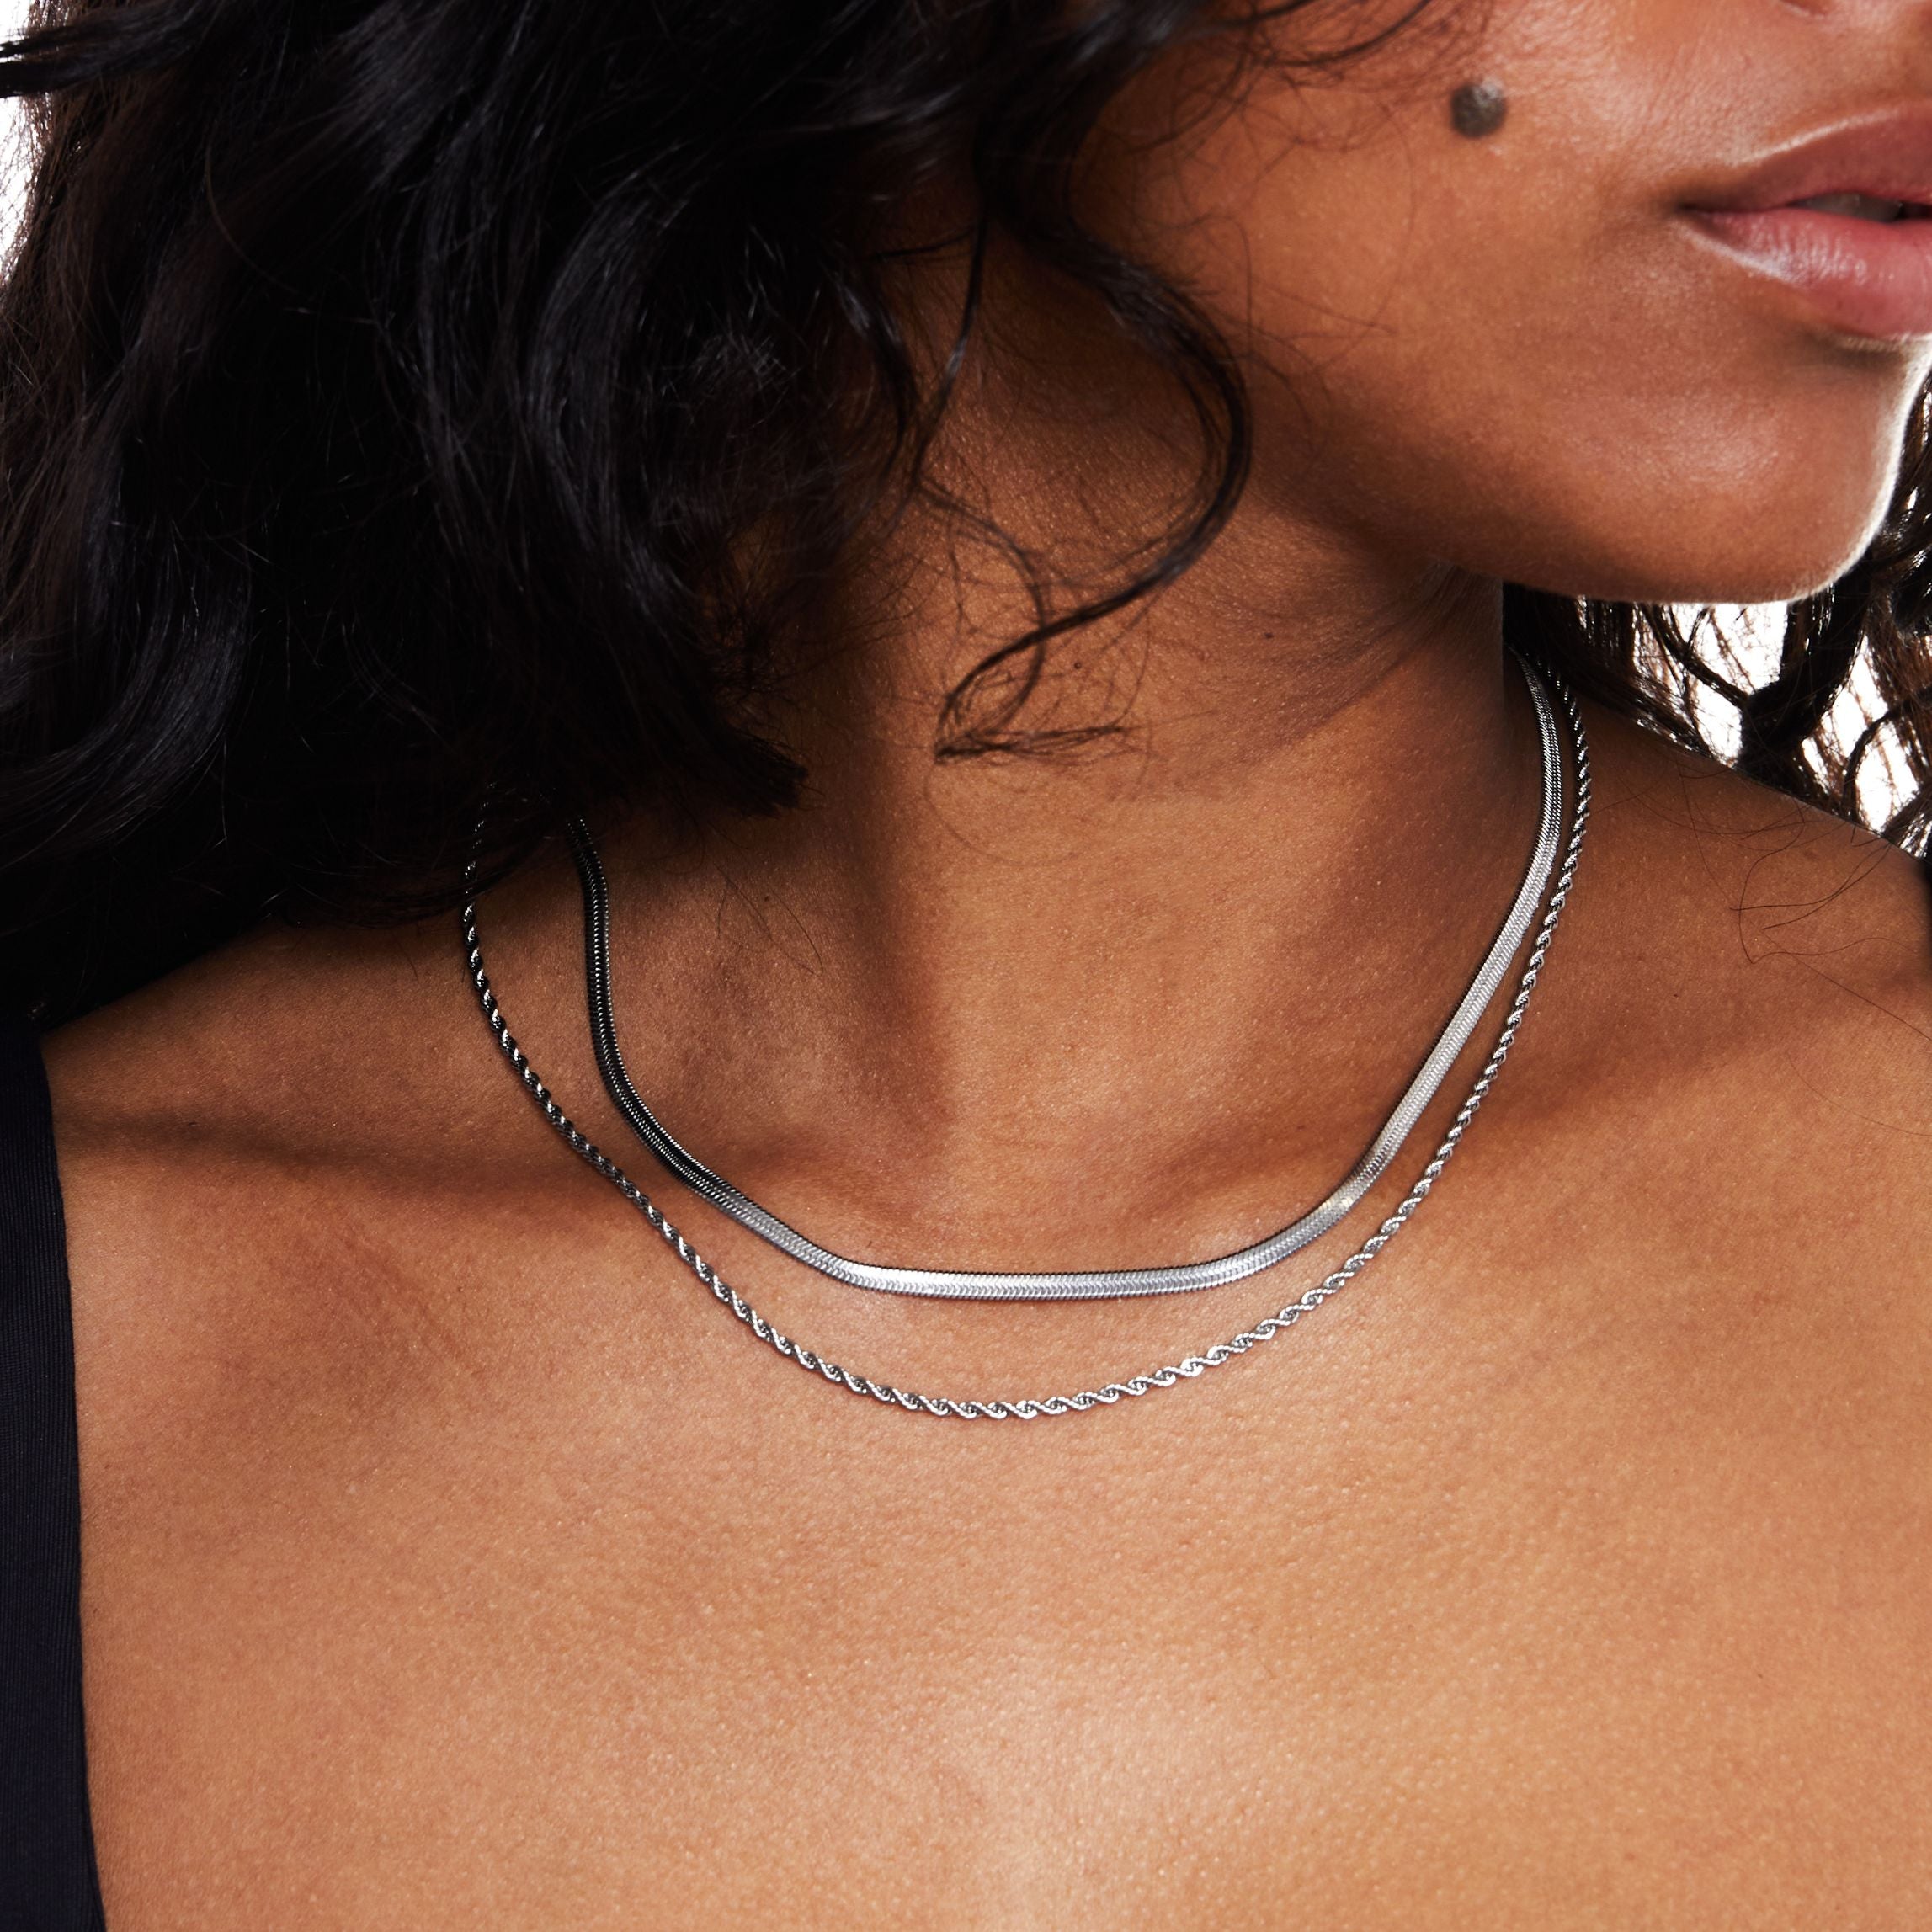 Silver layered necklaces